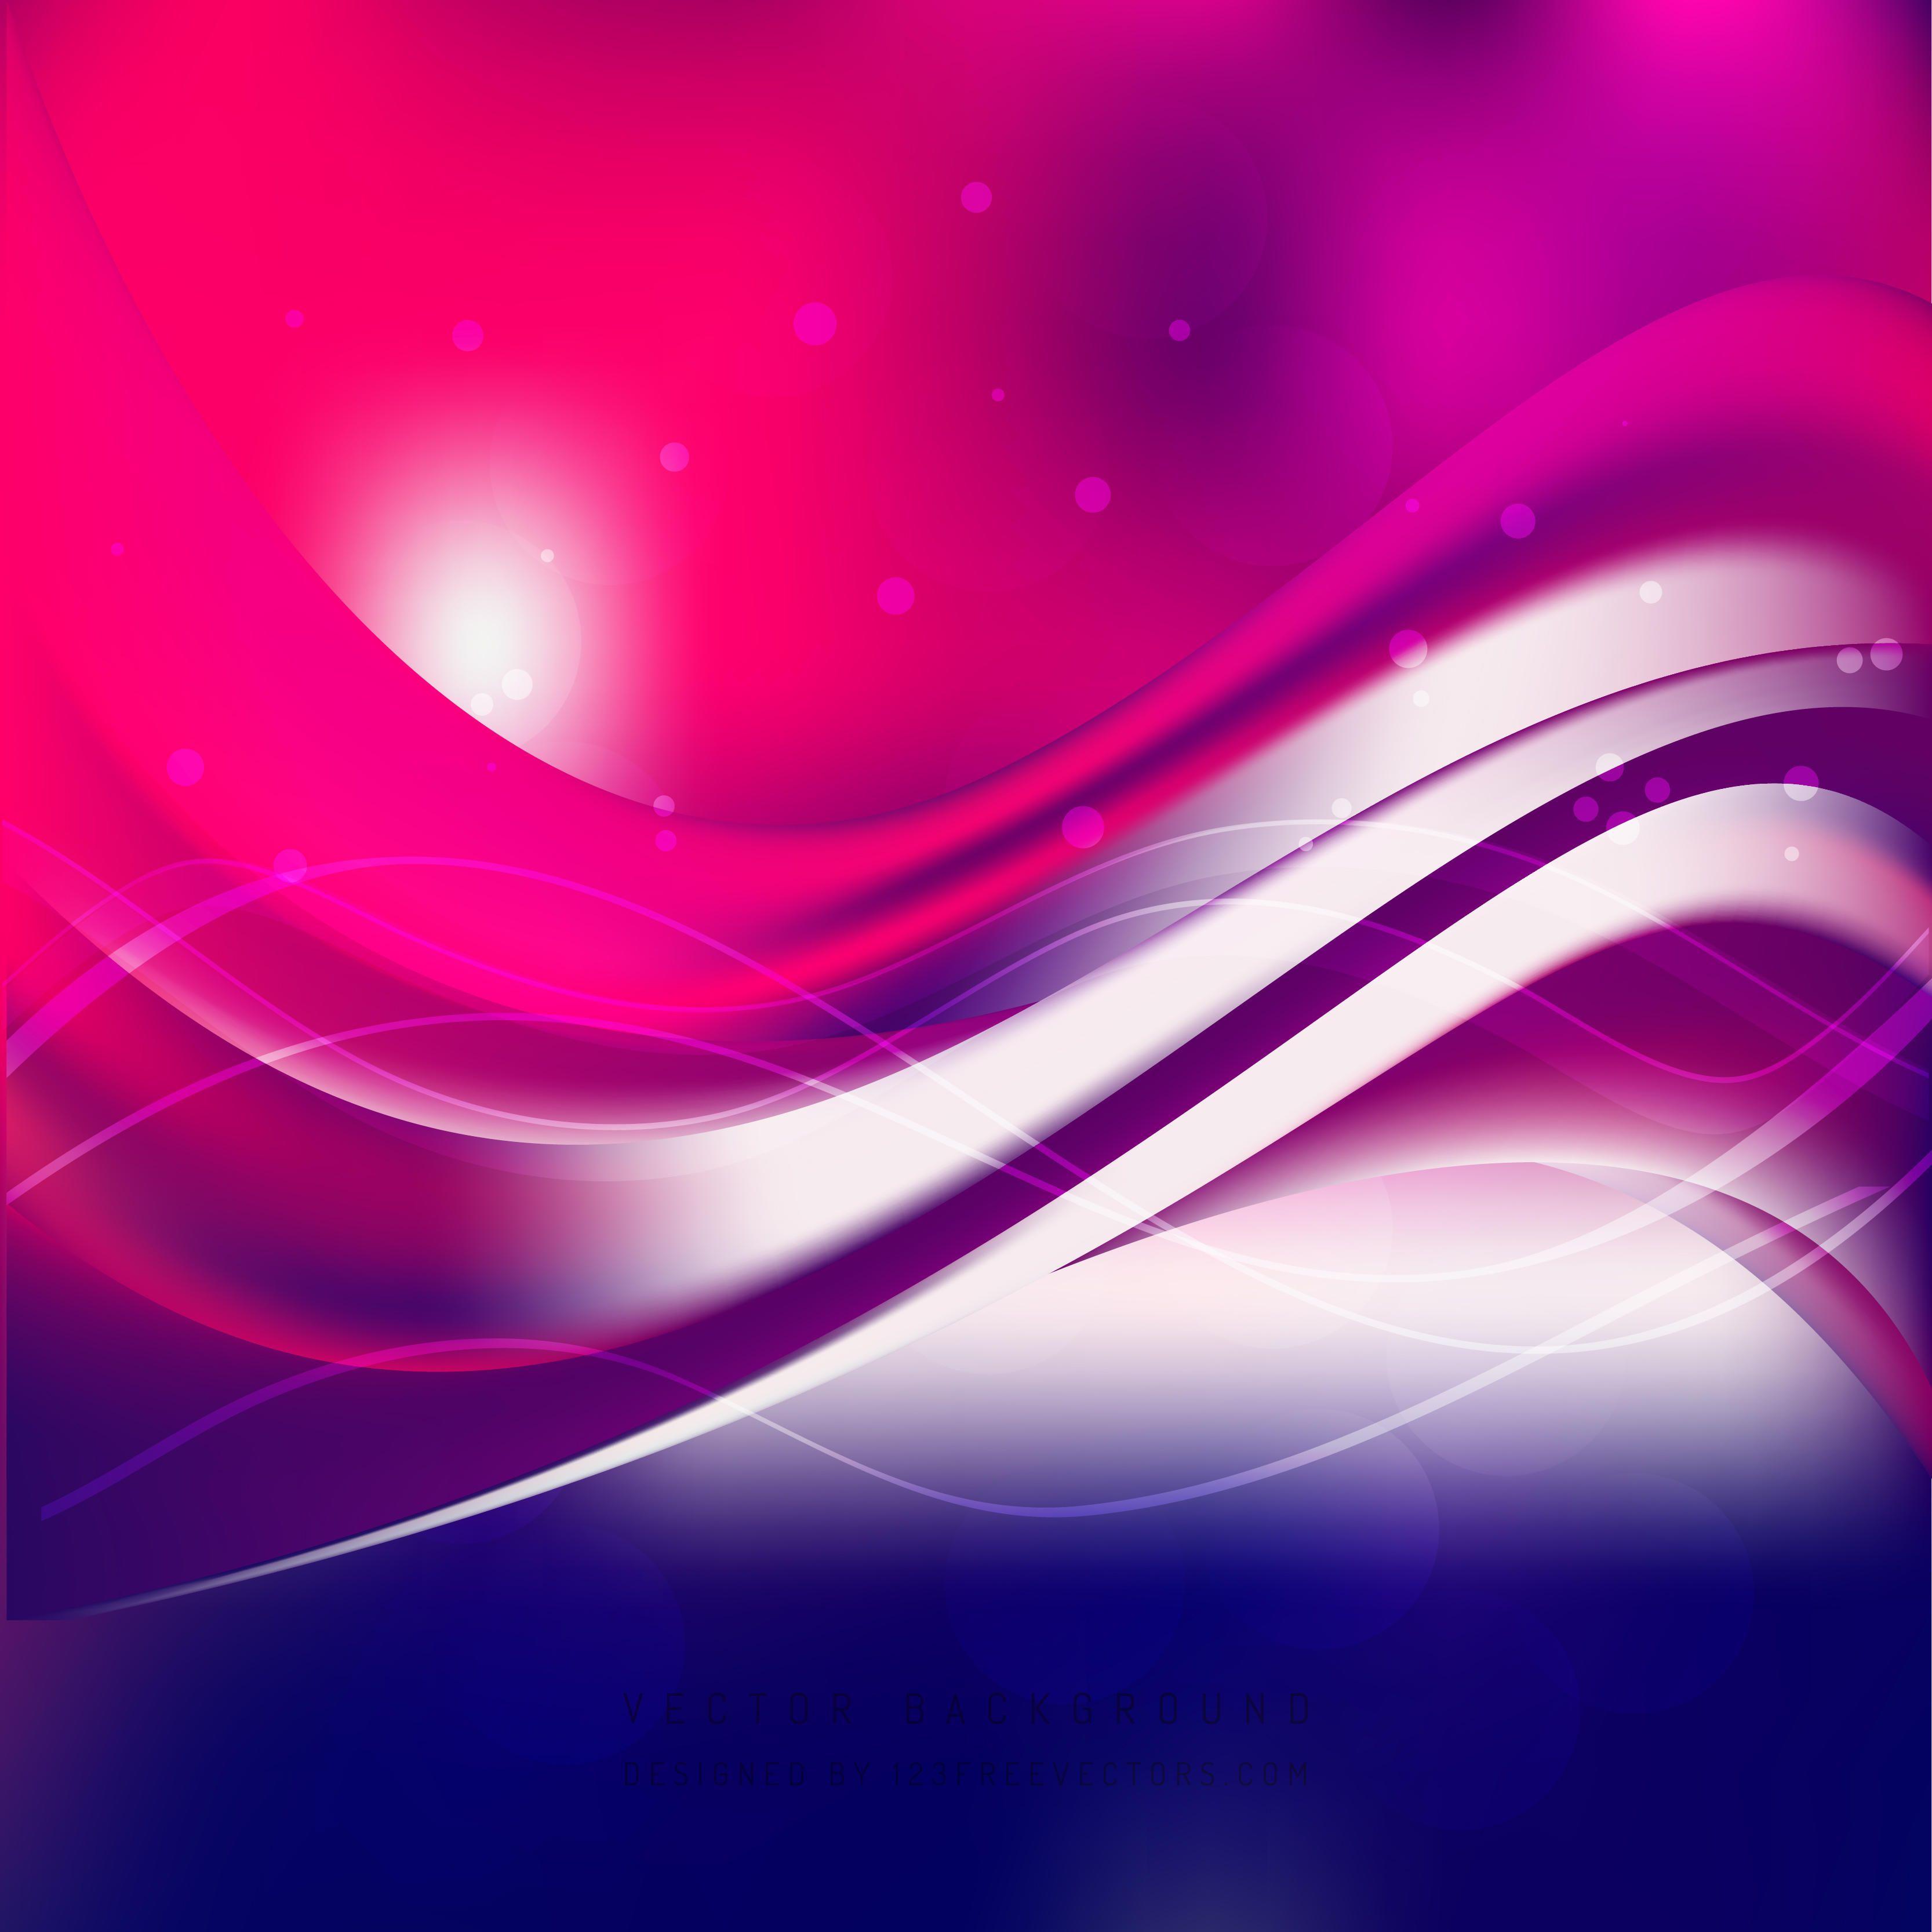 Pink and Purple Background Designs Vectors. Download Free